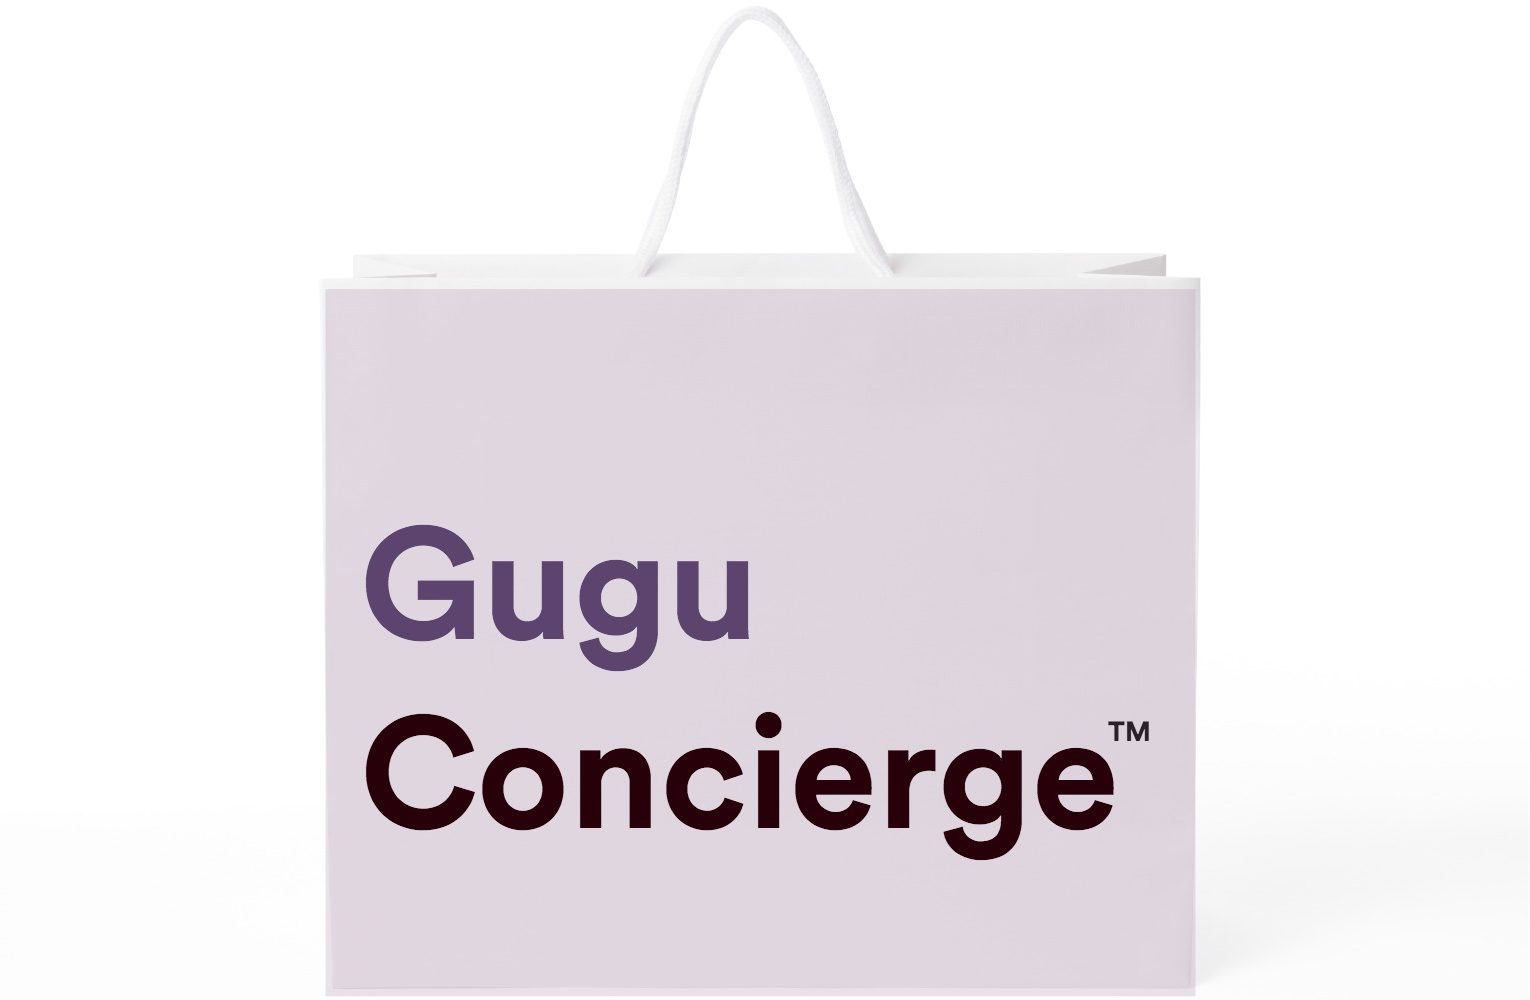 Introducing the NEW Gugu Concierge (+ We're Hiring!)